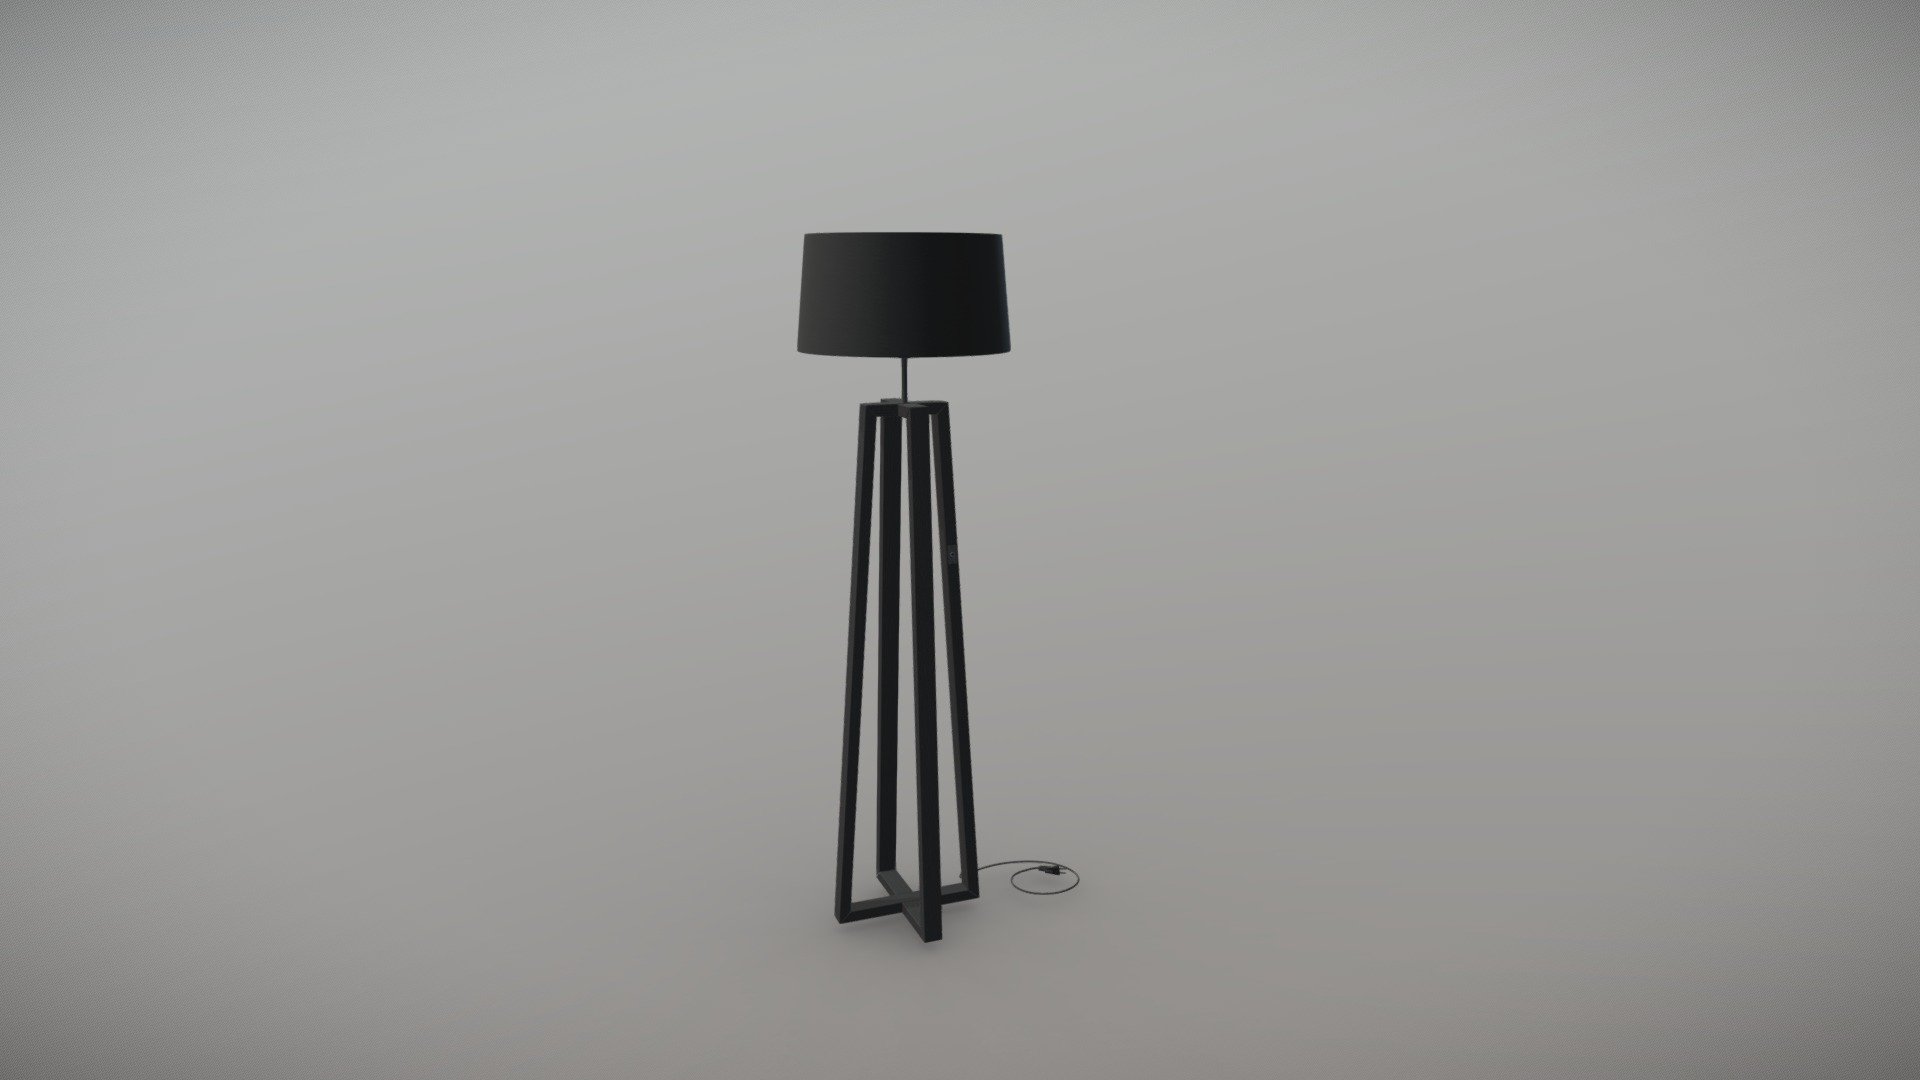 Wooden oak floor lamp with metallic button
Model: Tref019C
Name: Shad
Type: Floor Lamp
Dimensions: 178x54x54(cm)
Materials: Solid Wood Oak, Fabric
lampshade, Fabric cable
Light source: E27 socket
Control: Inox lighting button 220V
Weight: 7.9kg - Shad - Tref019C - Download Free 3D model by Trelight 3d model